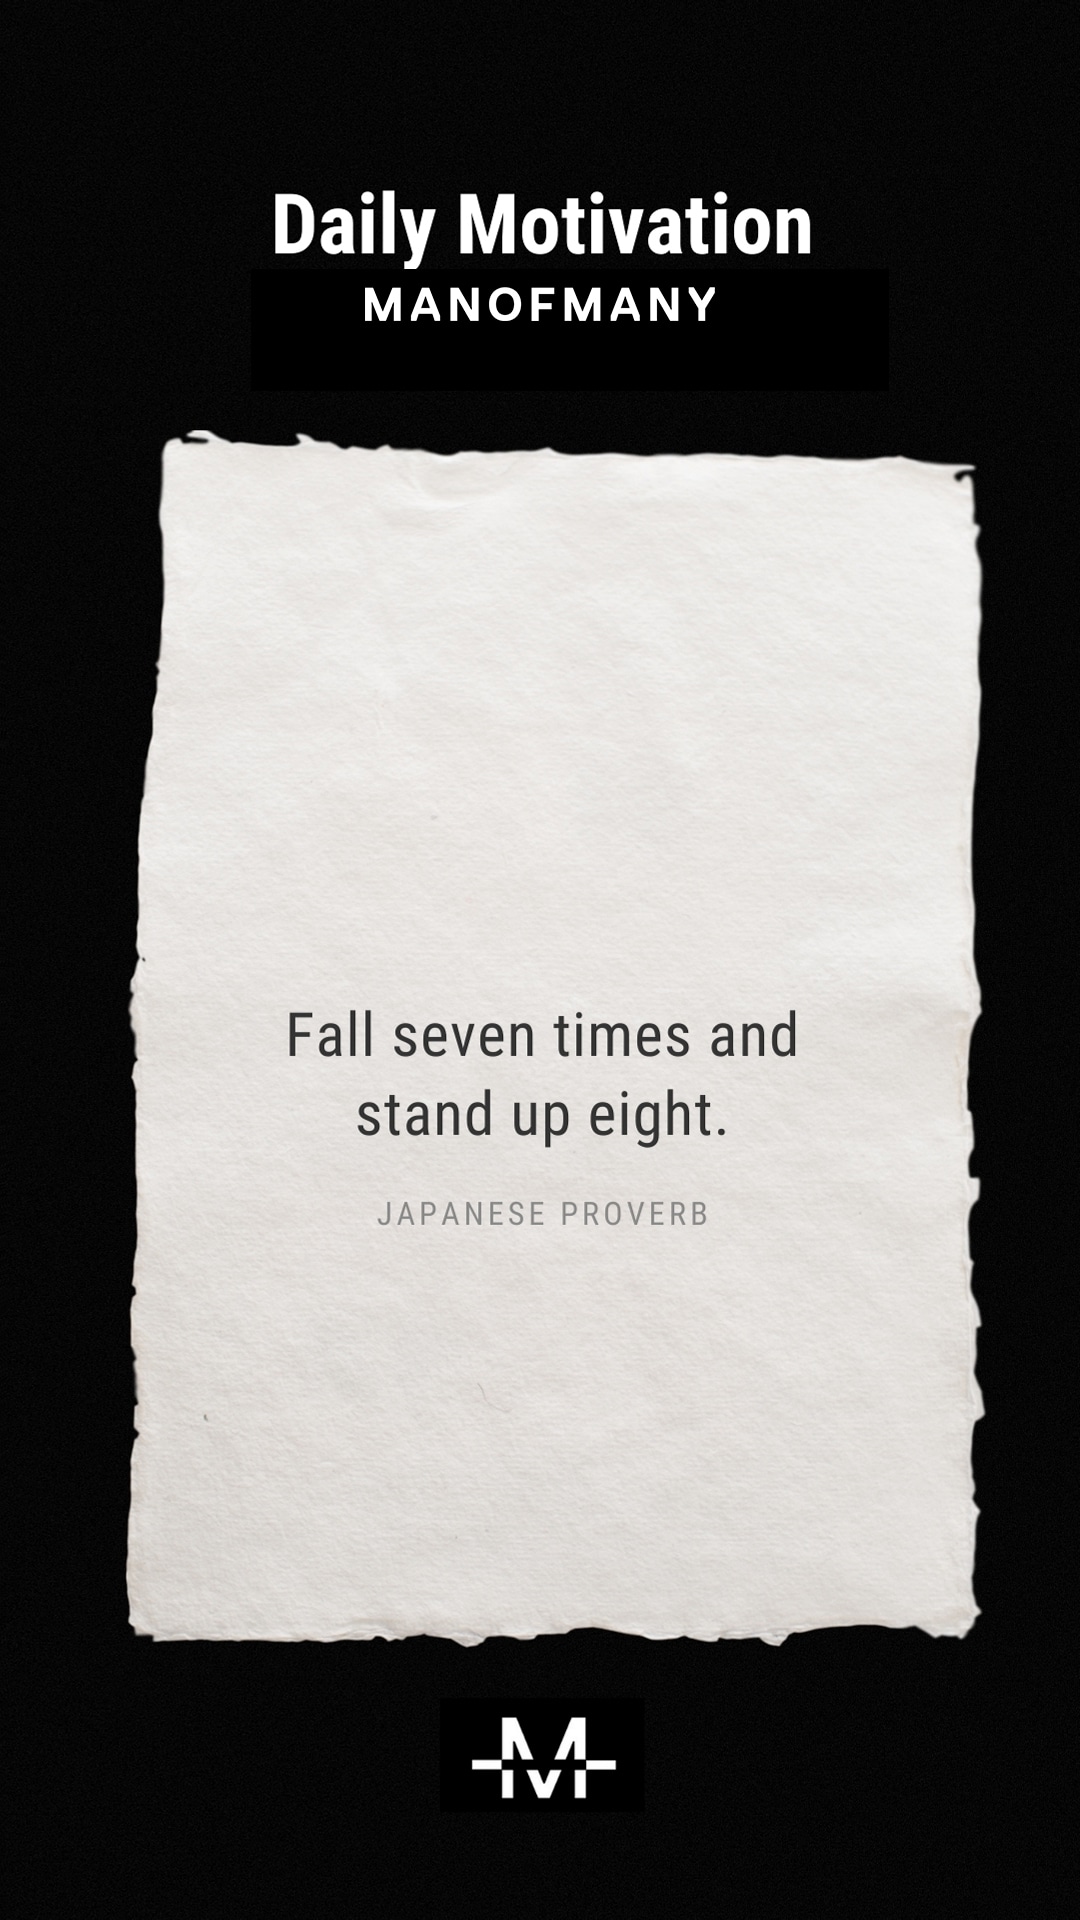 Fall seven times and stand up eight. –Japanese Proverb